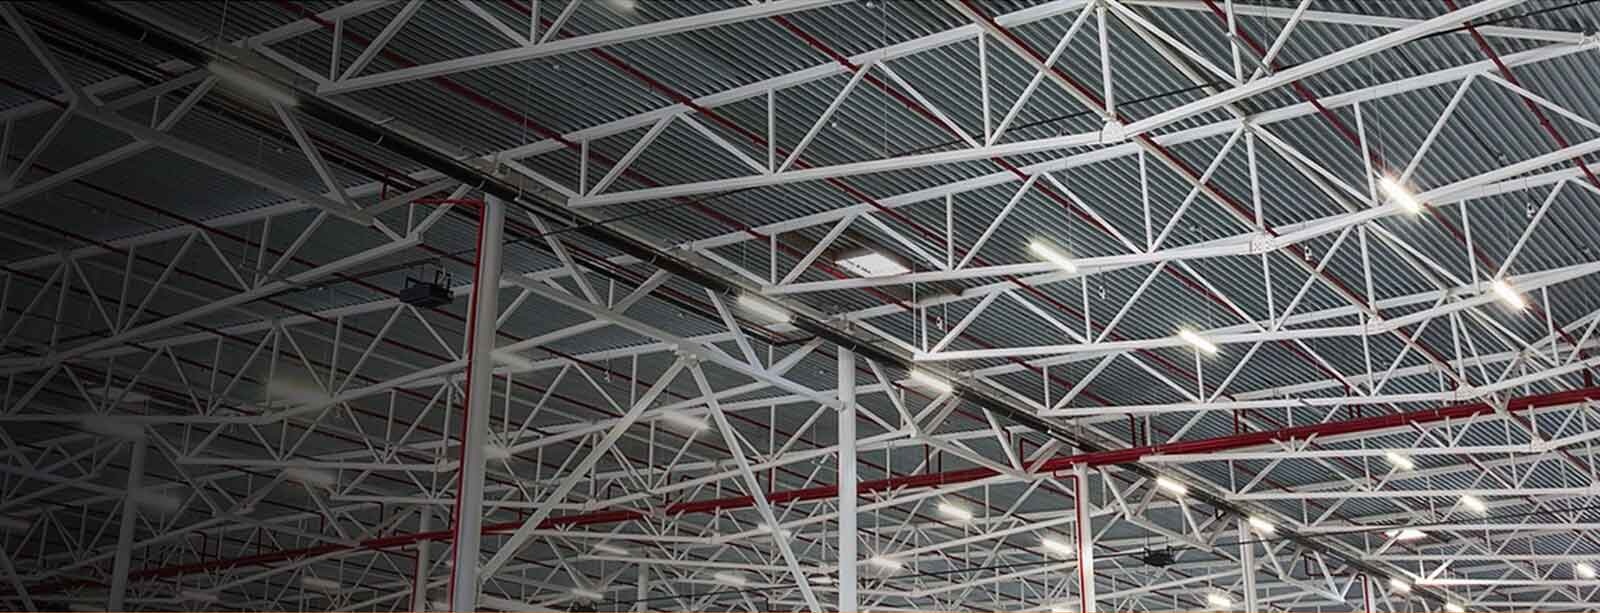 Warehouse Lighting Installation by Electrical Contractors in Saskatchewan - Flyer Electric 